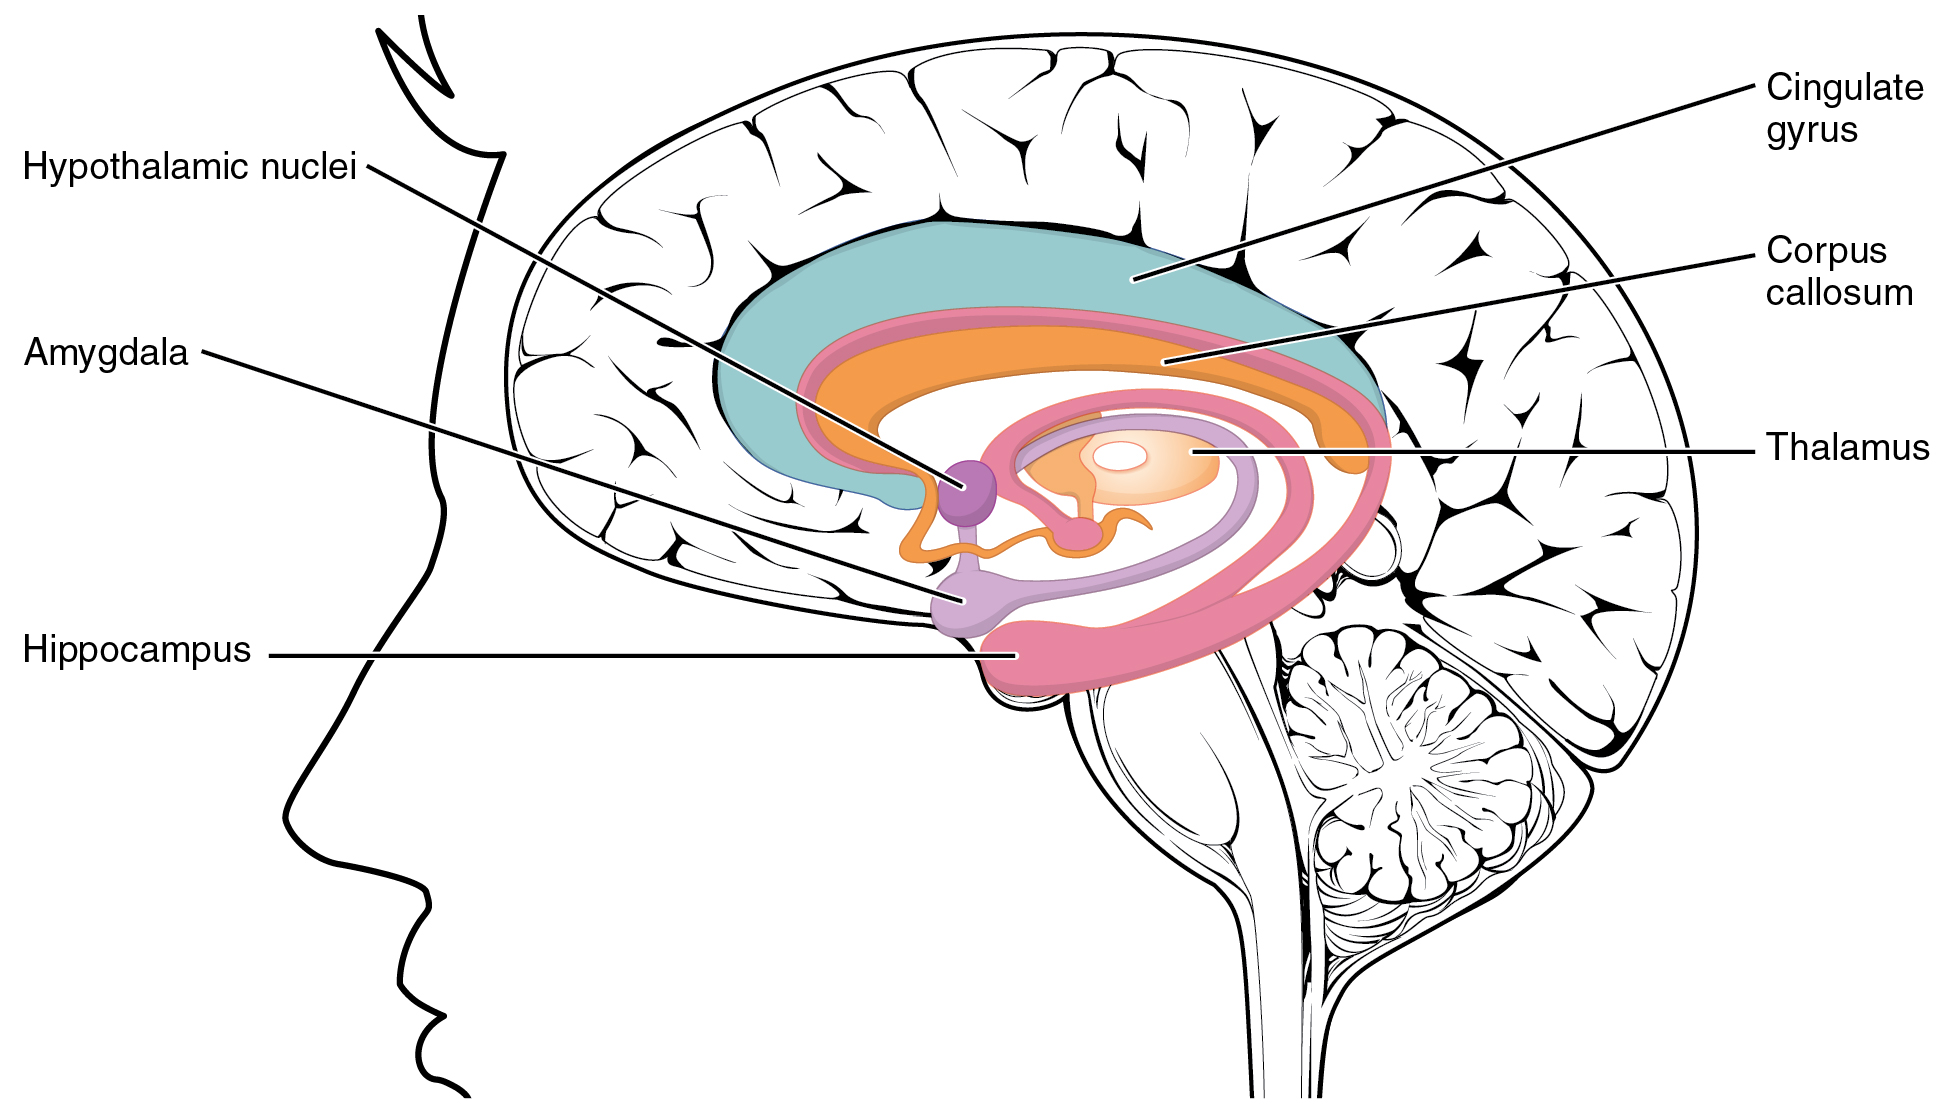 This figure shows the location of the limbic lobe and its major parts in the human brain.